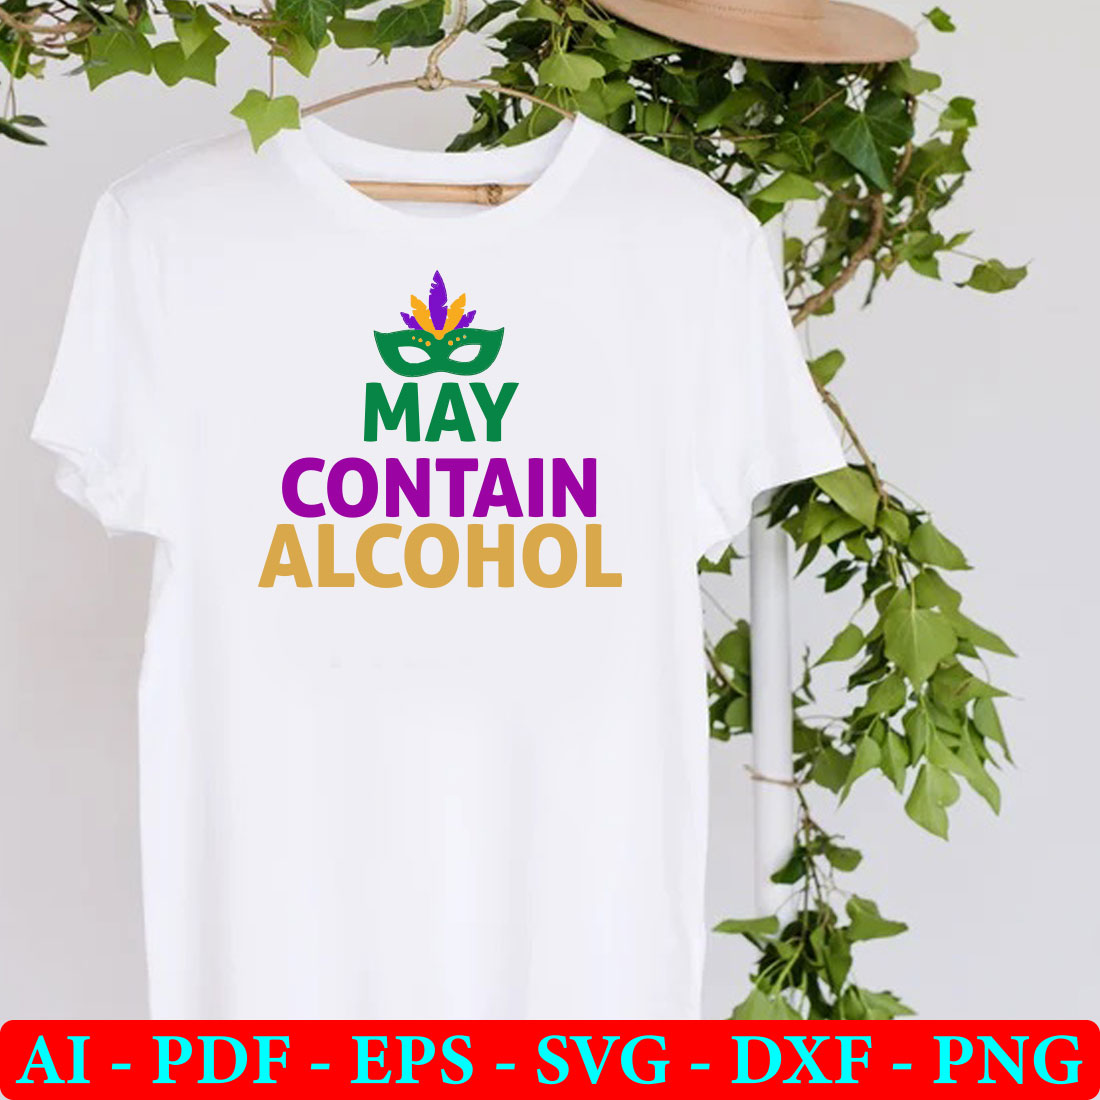 T - shirt that says may contain alcohol.